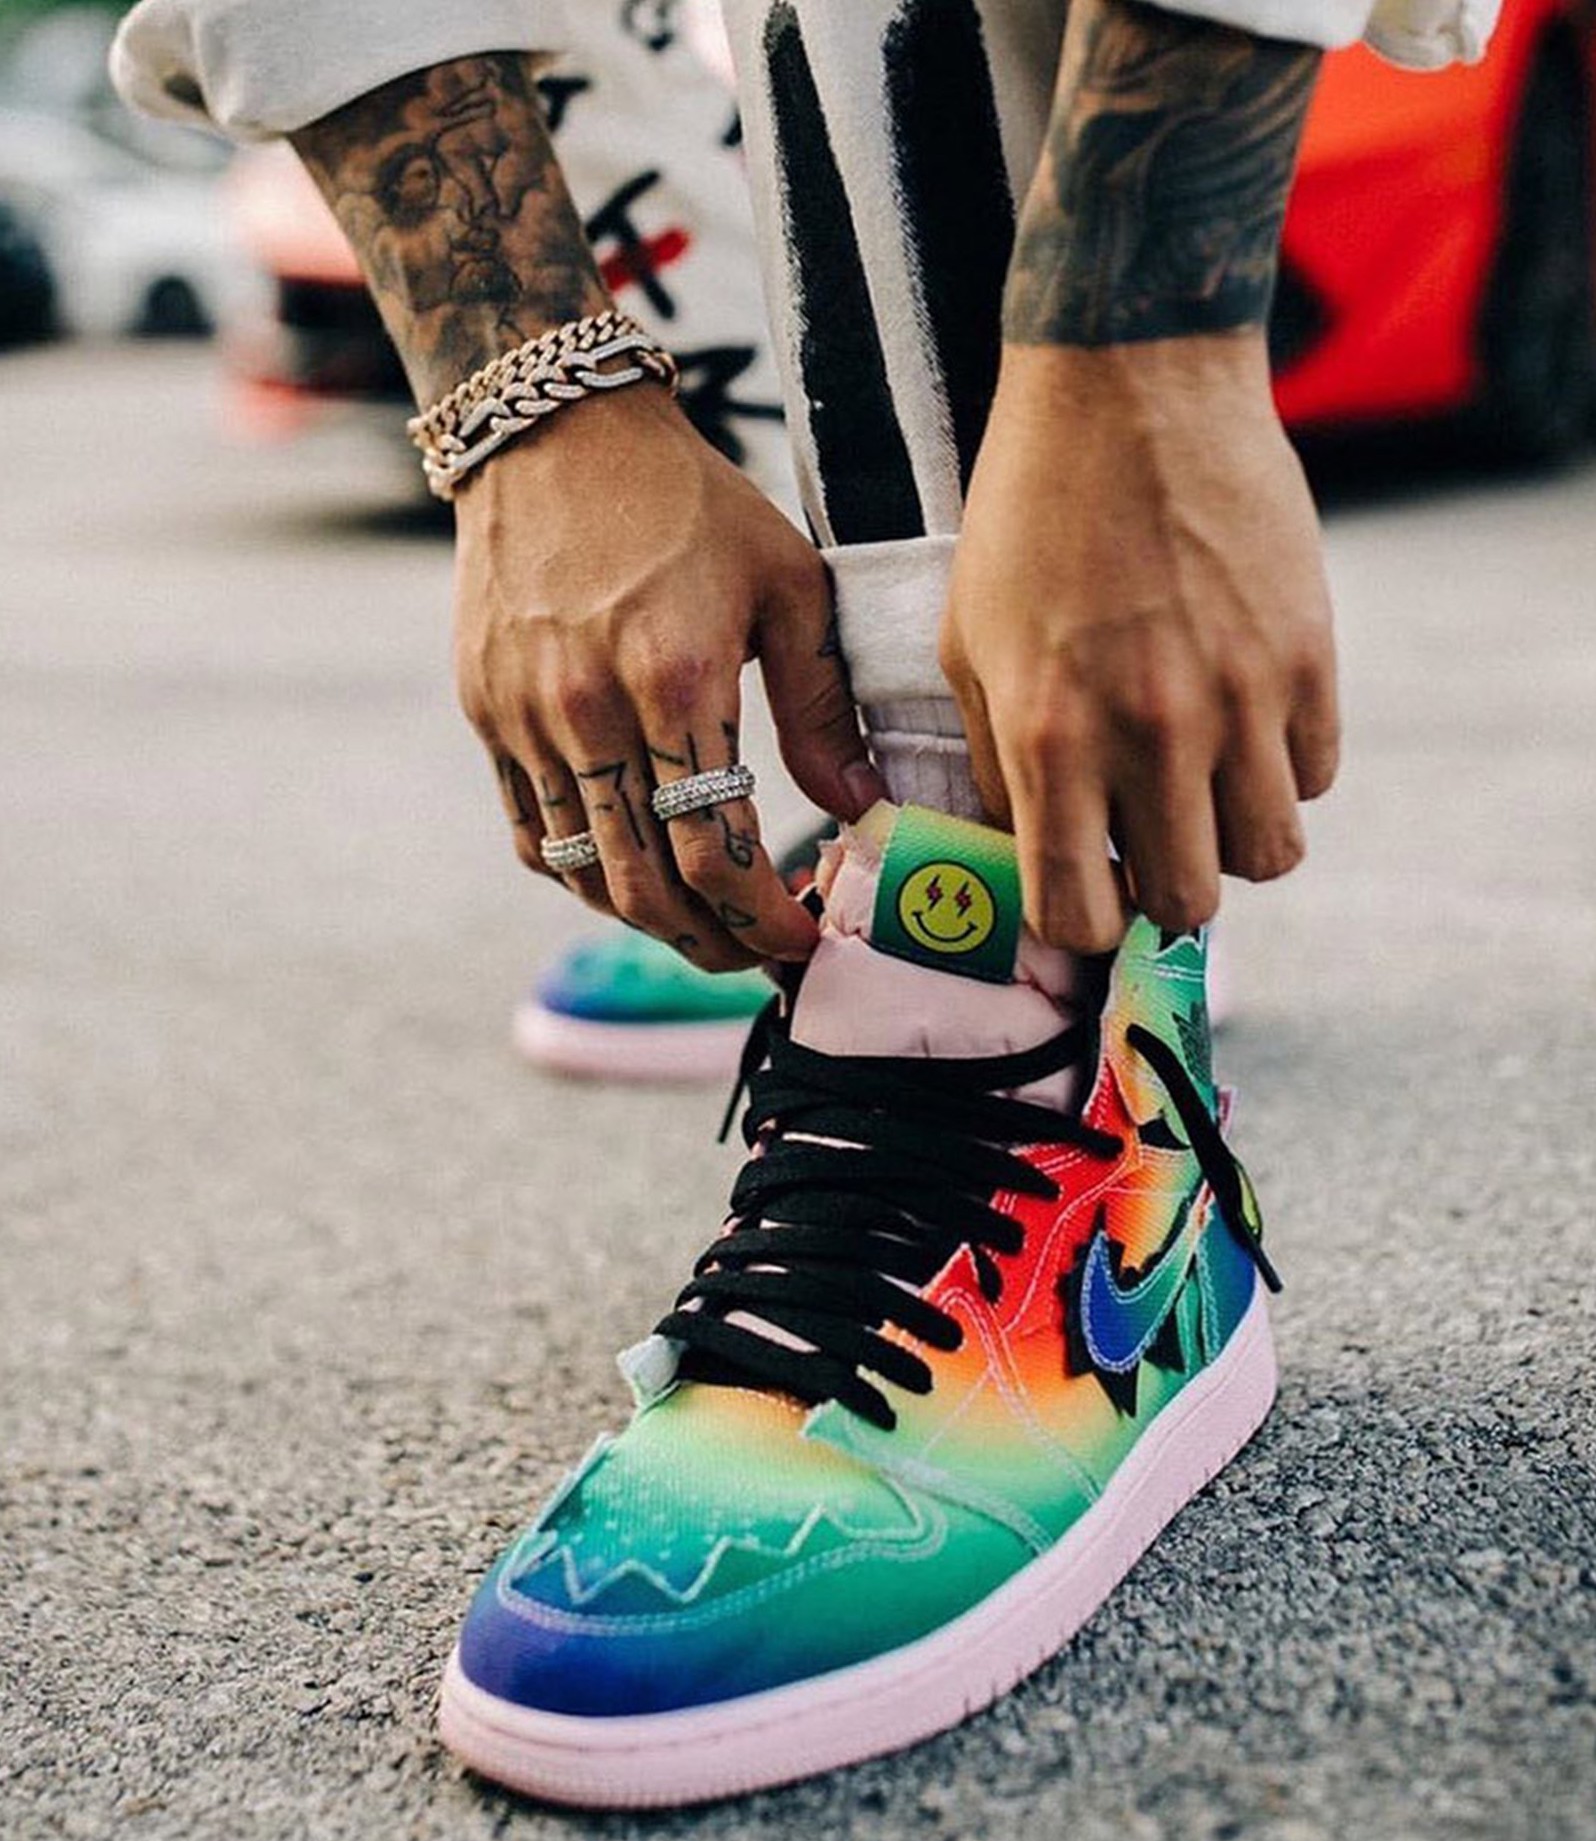 j balvin shoes release date